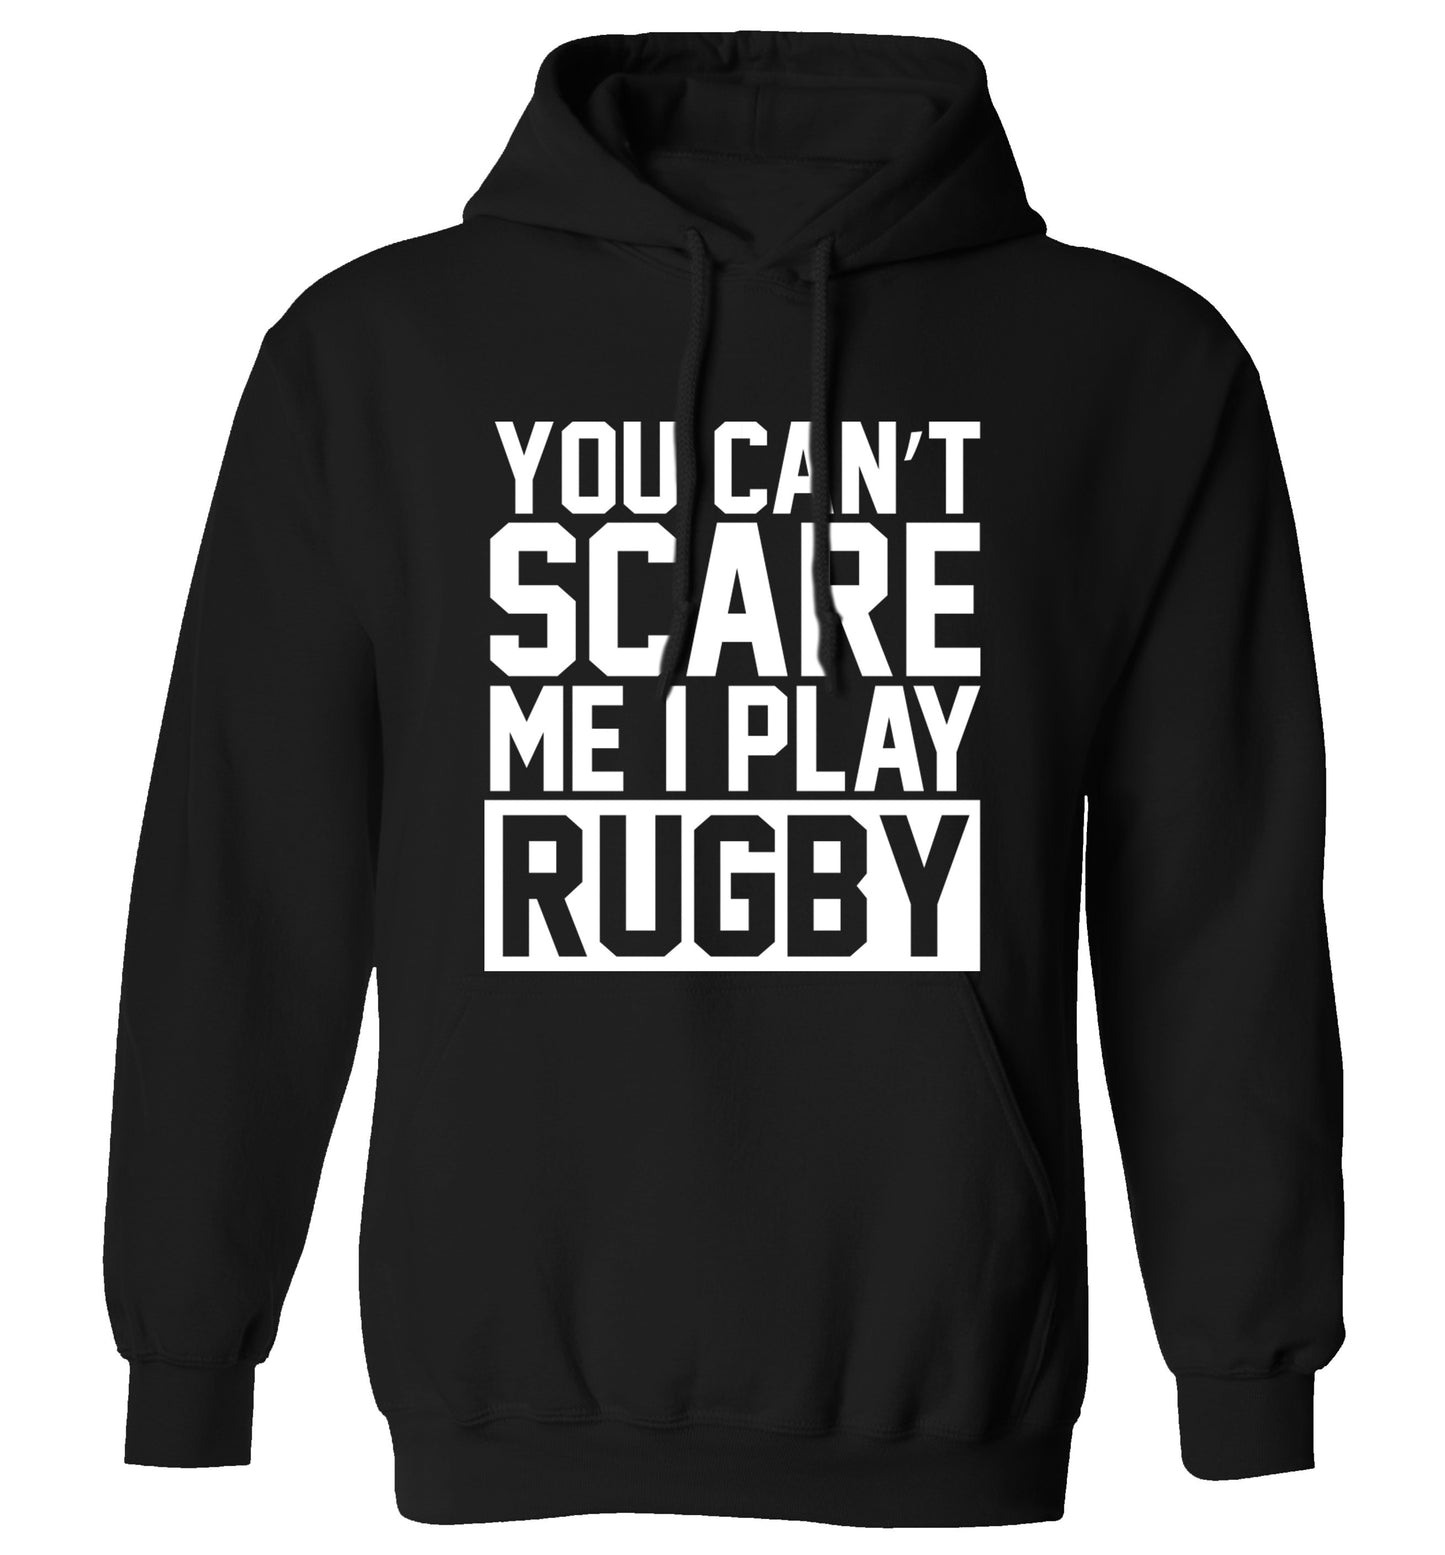 You can't scare me I play rugby adults unisex black hoodie 2XL